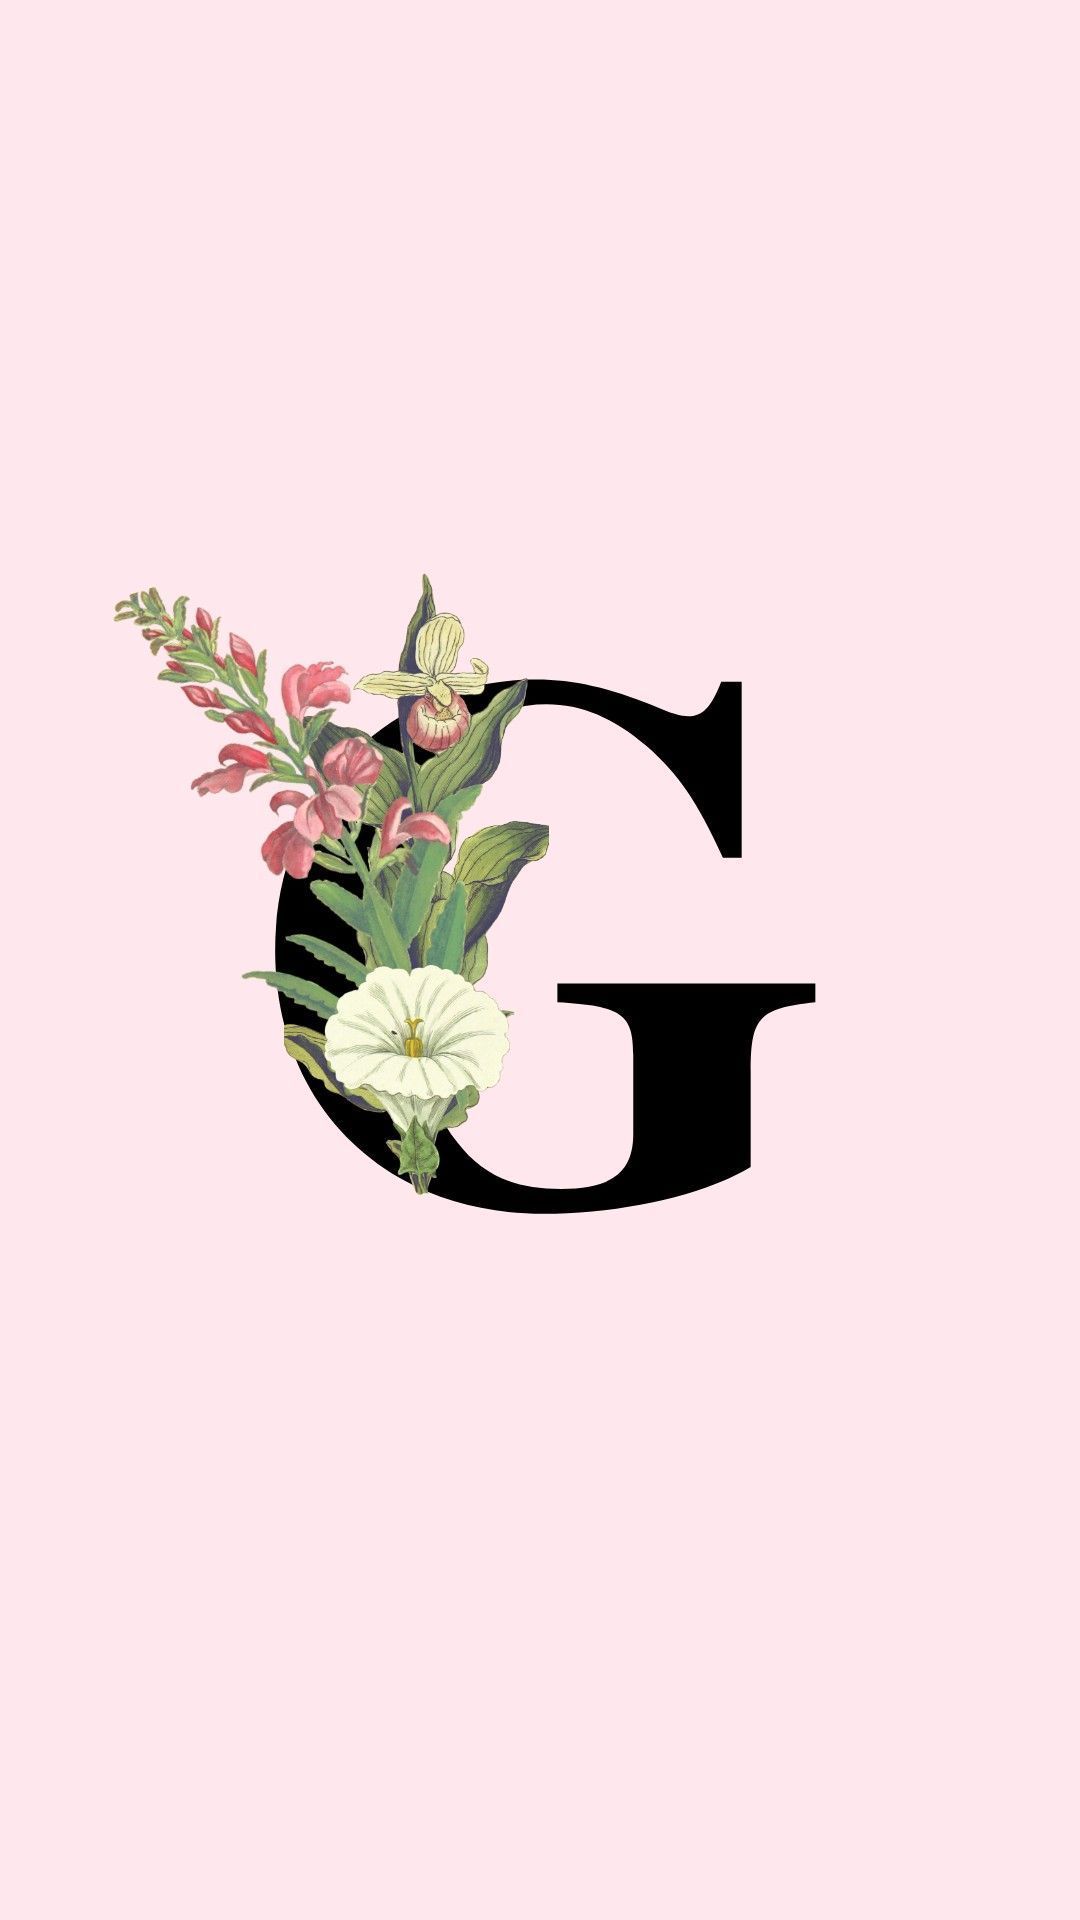 Letter G Phone Wallpaper. iPhone background vintage, Simple background image, Alphabet wallpaper